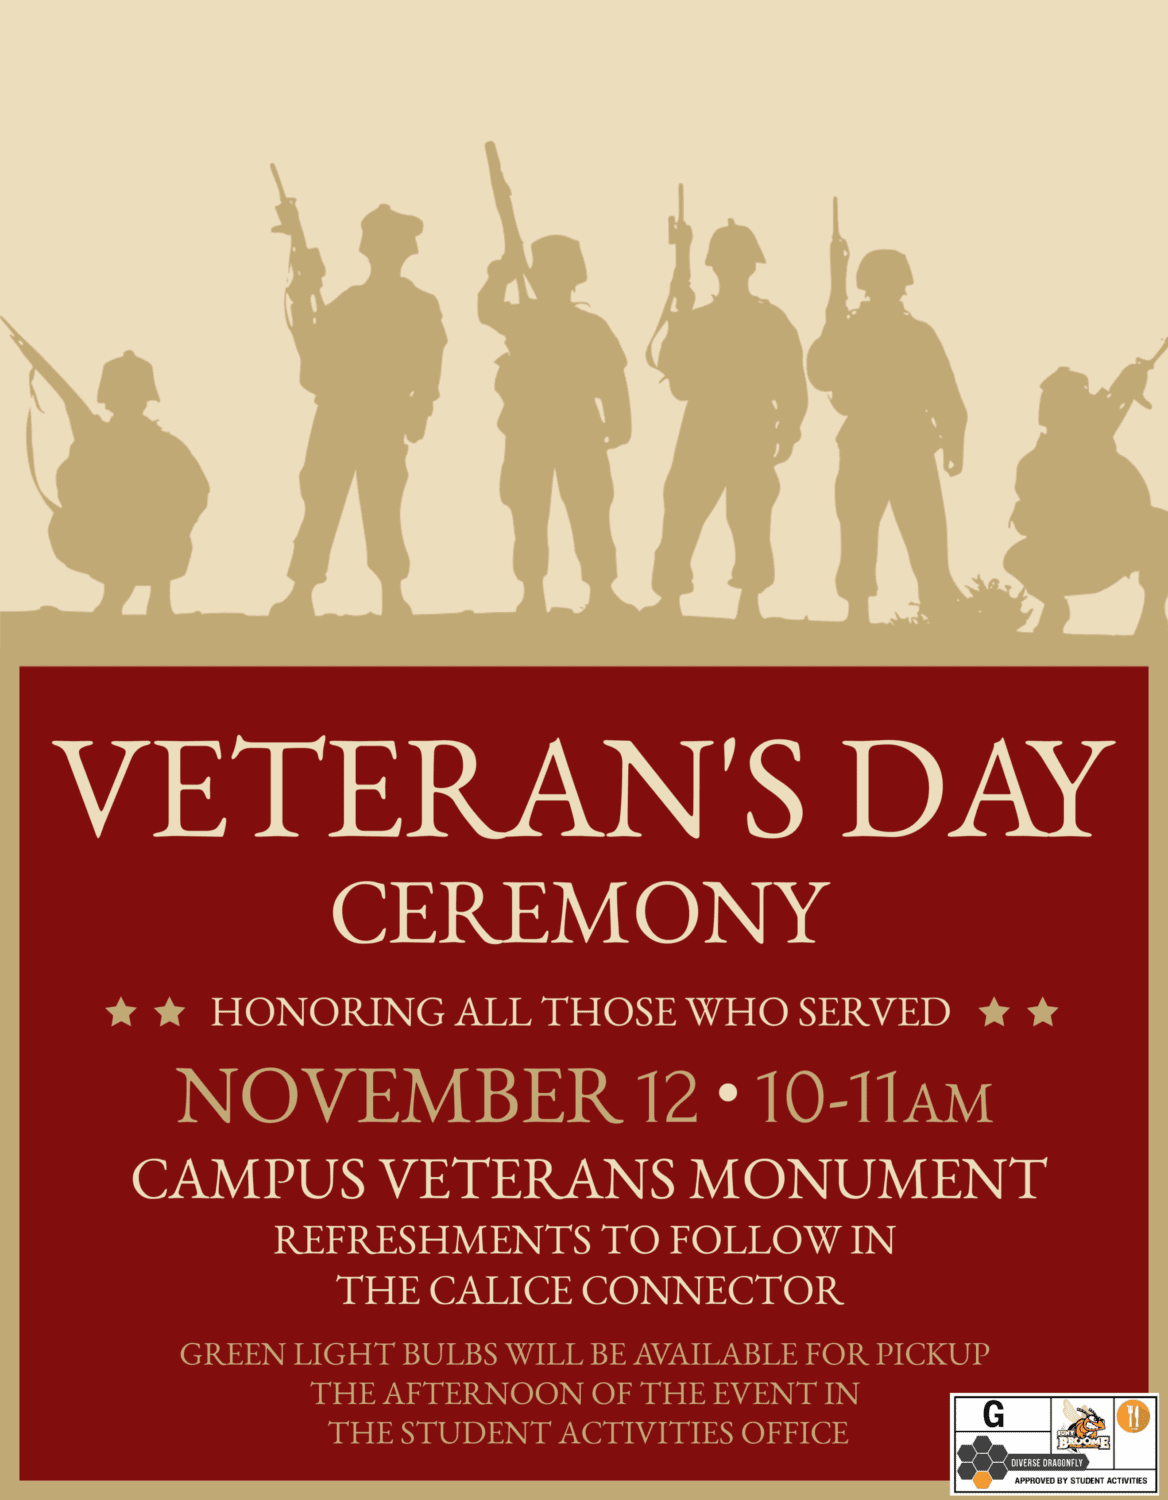 Veterans Day at SUNY Broome on Nov. 12